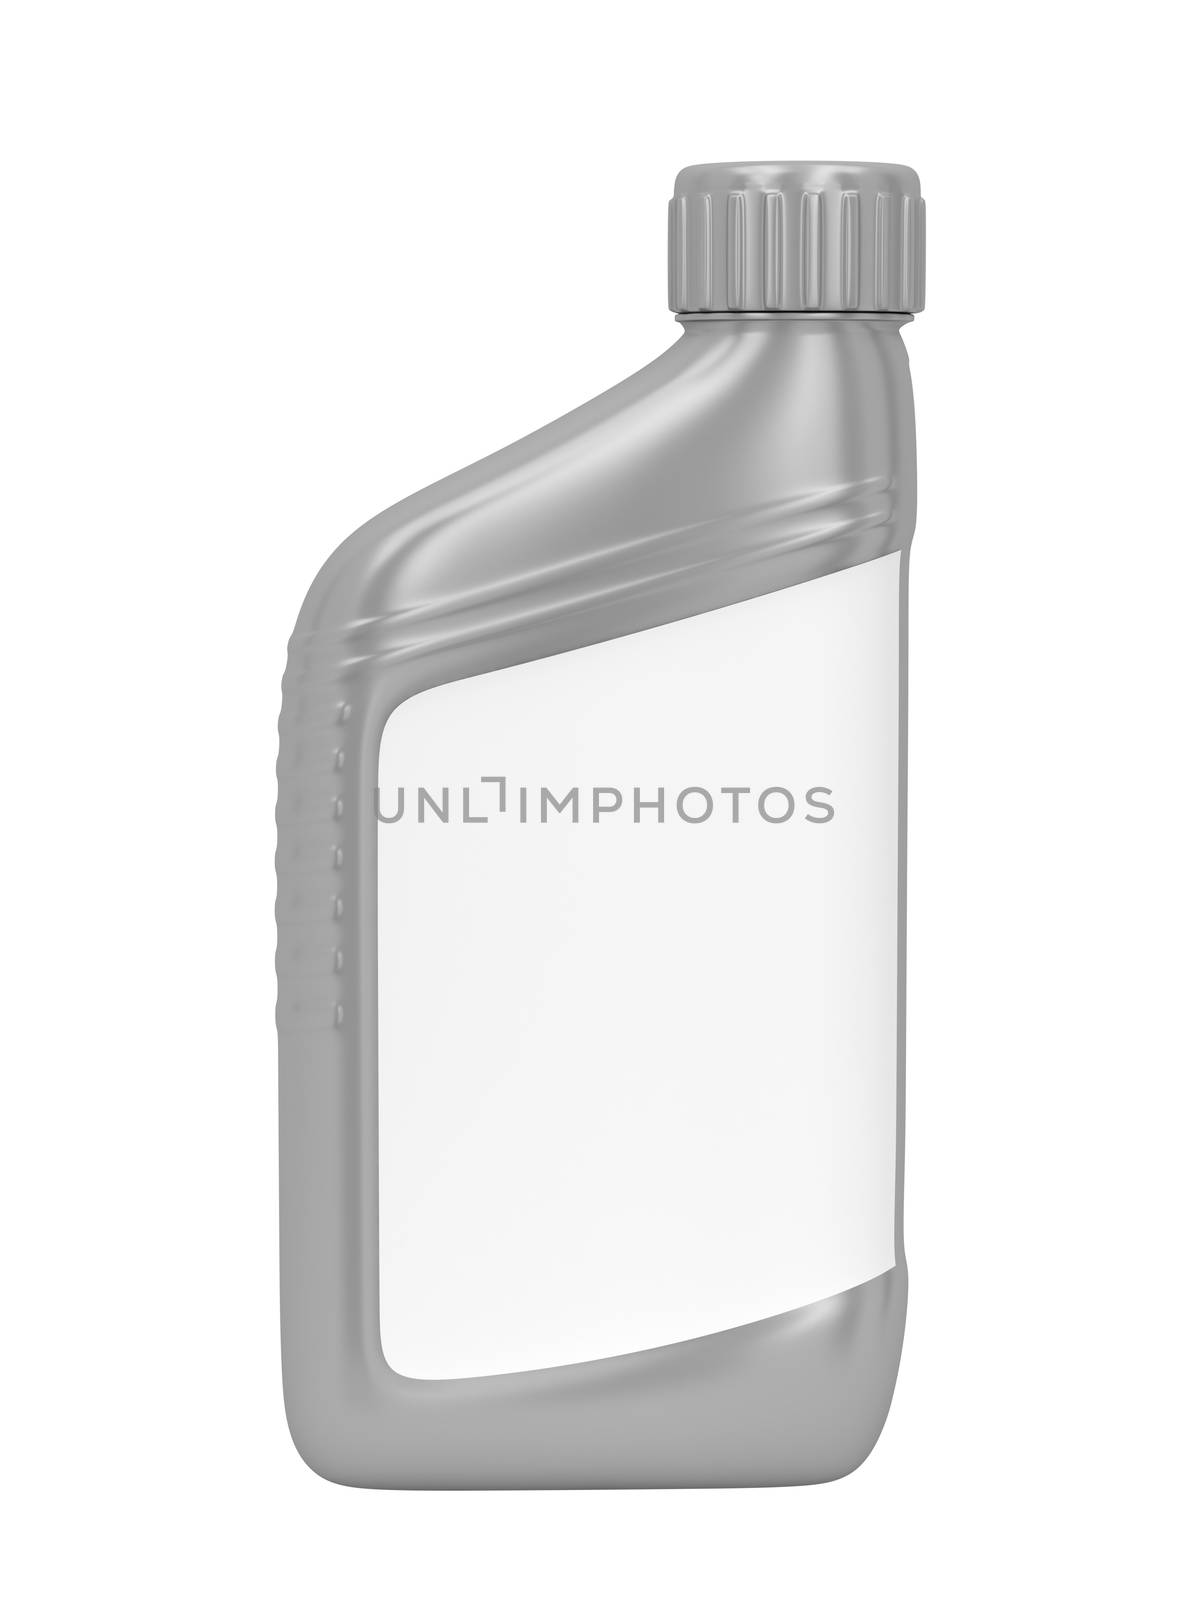 Machine oil bottle with blank label isolated on white background